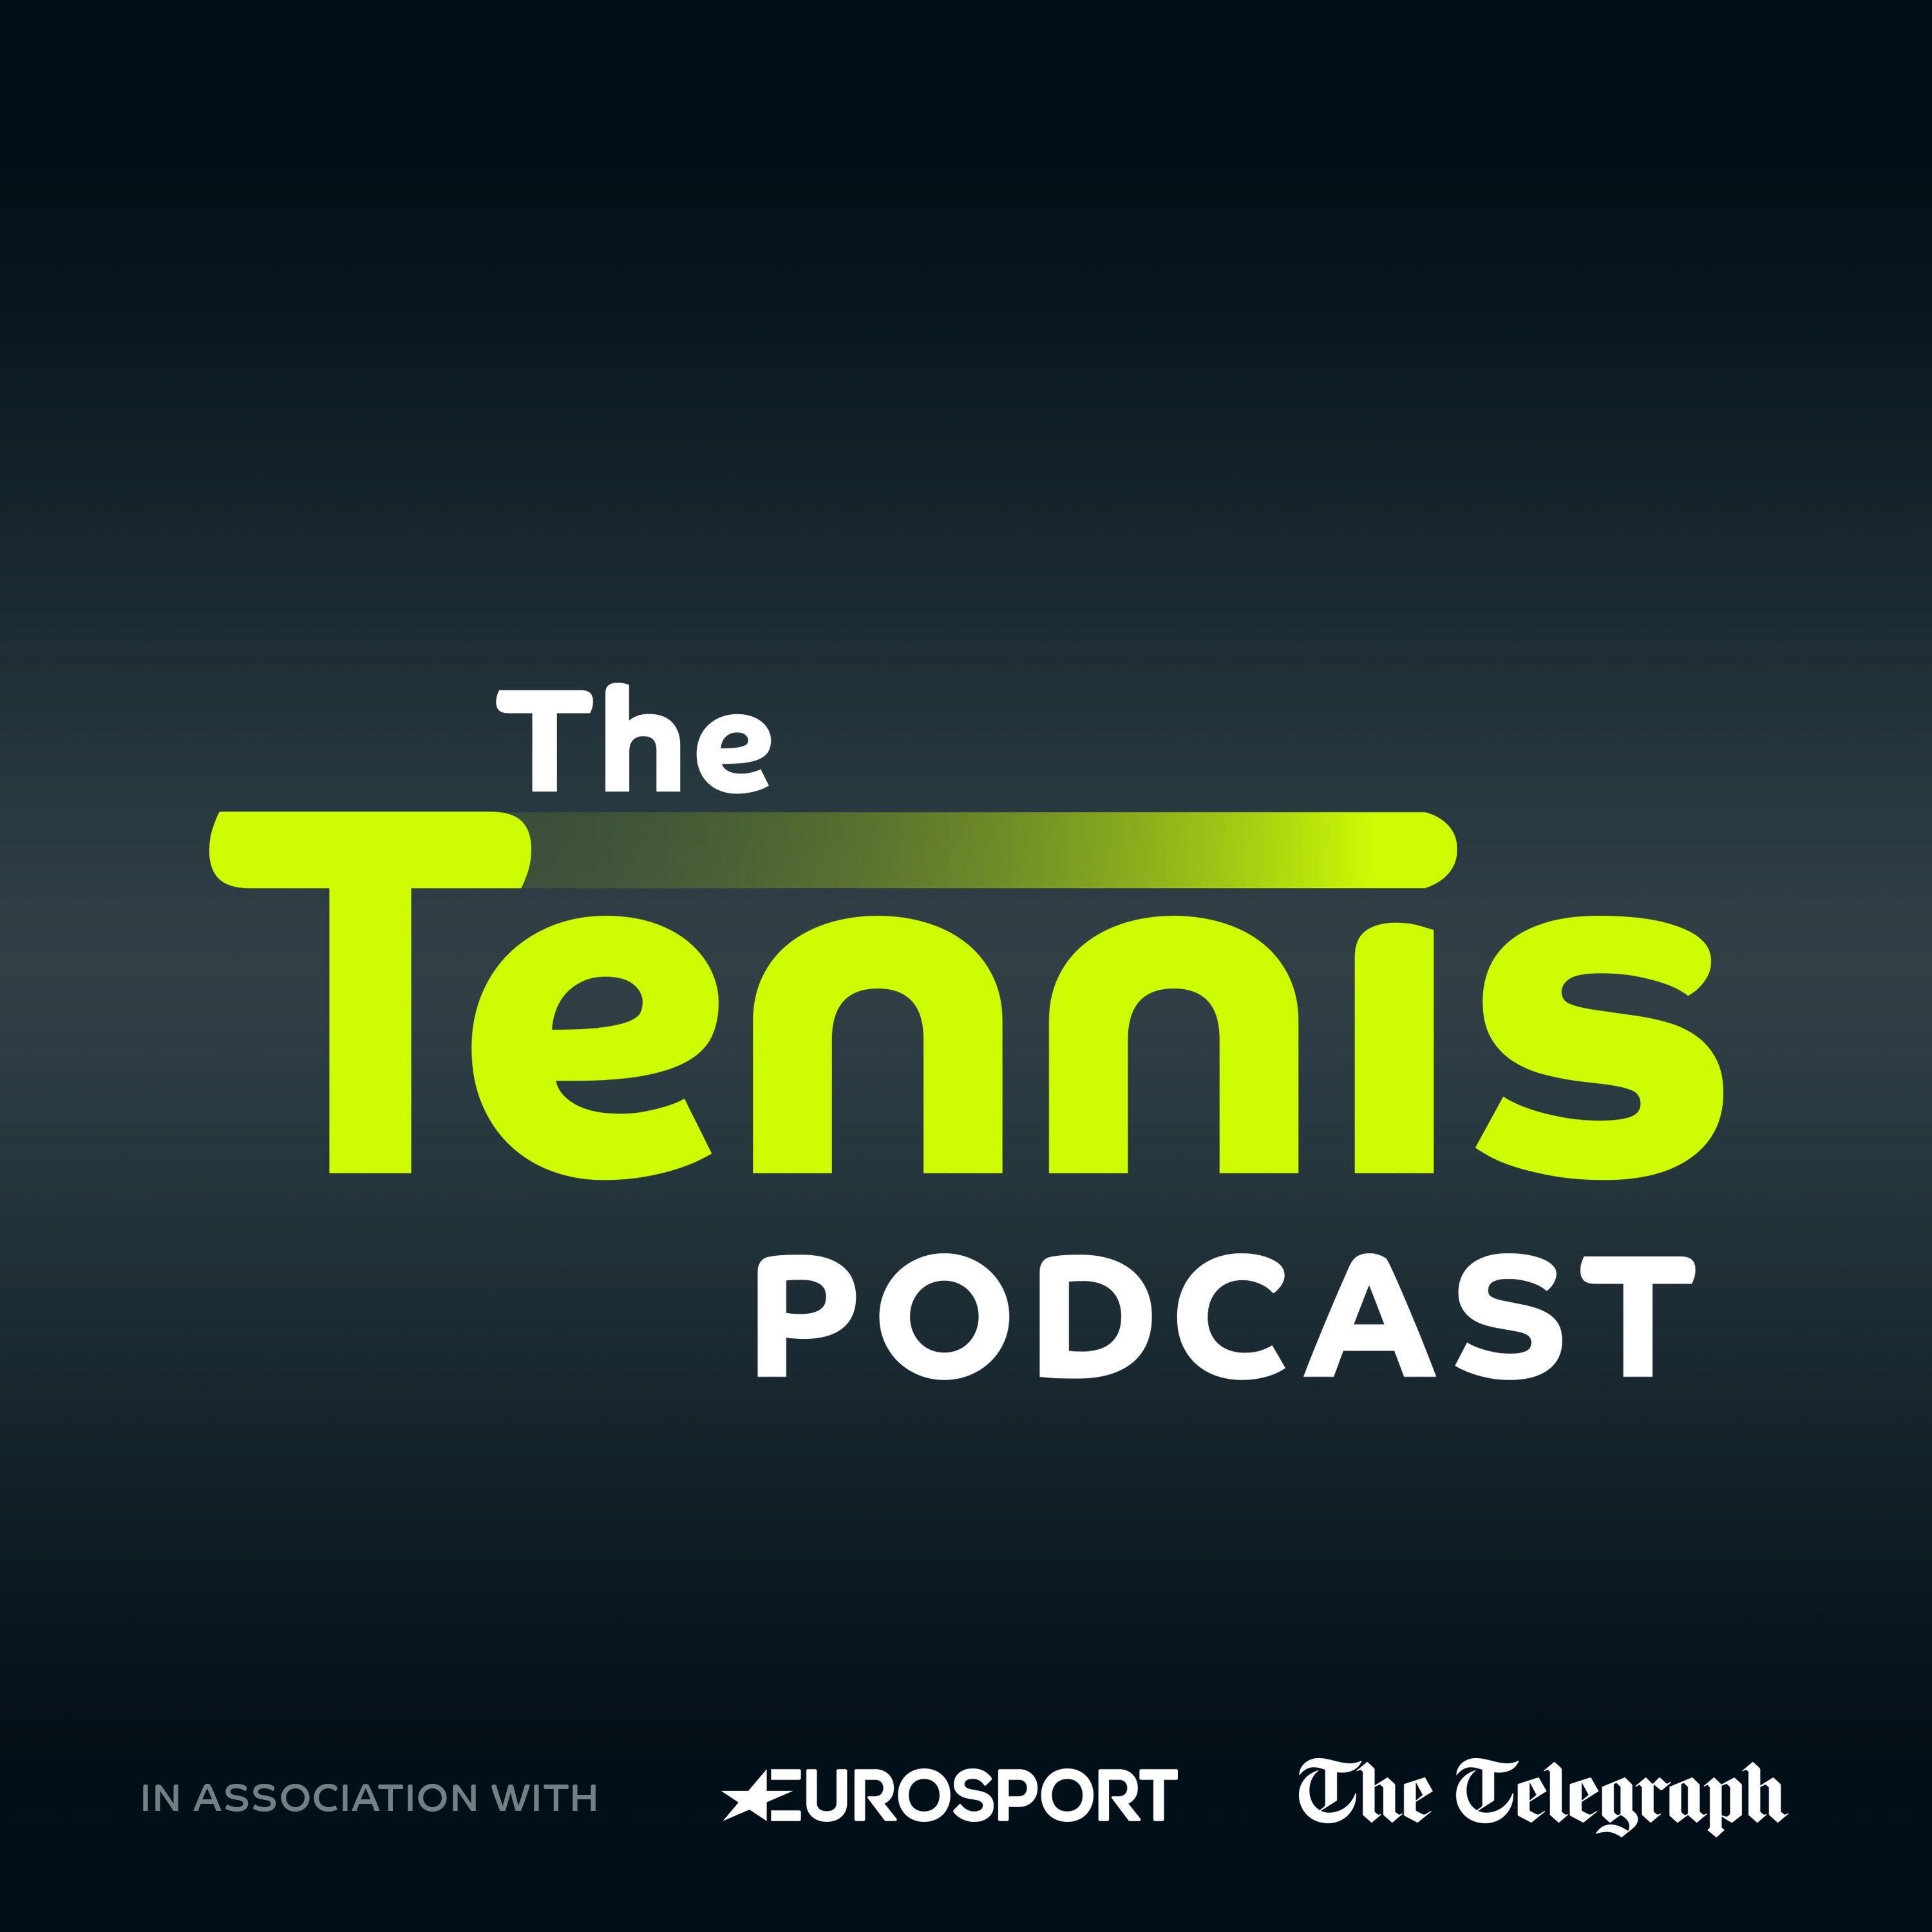 The ’Disappointing & Disgusting’ Next Gen Finals Draw: The Tennis Podcast Take. Plus Jack Sock’s London Surge & An Emotional Introduction to Filip Krajinovic